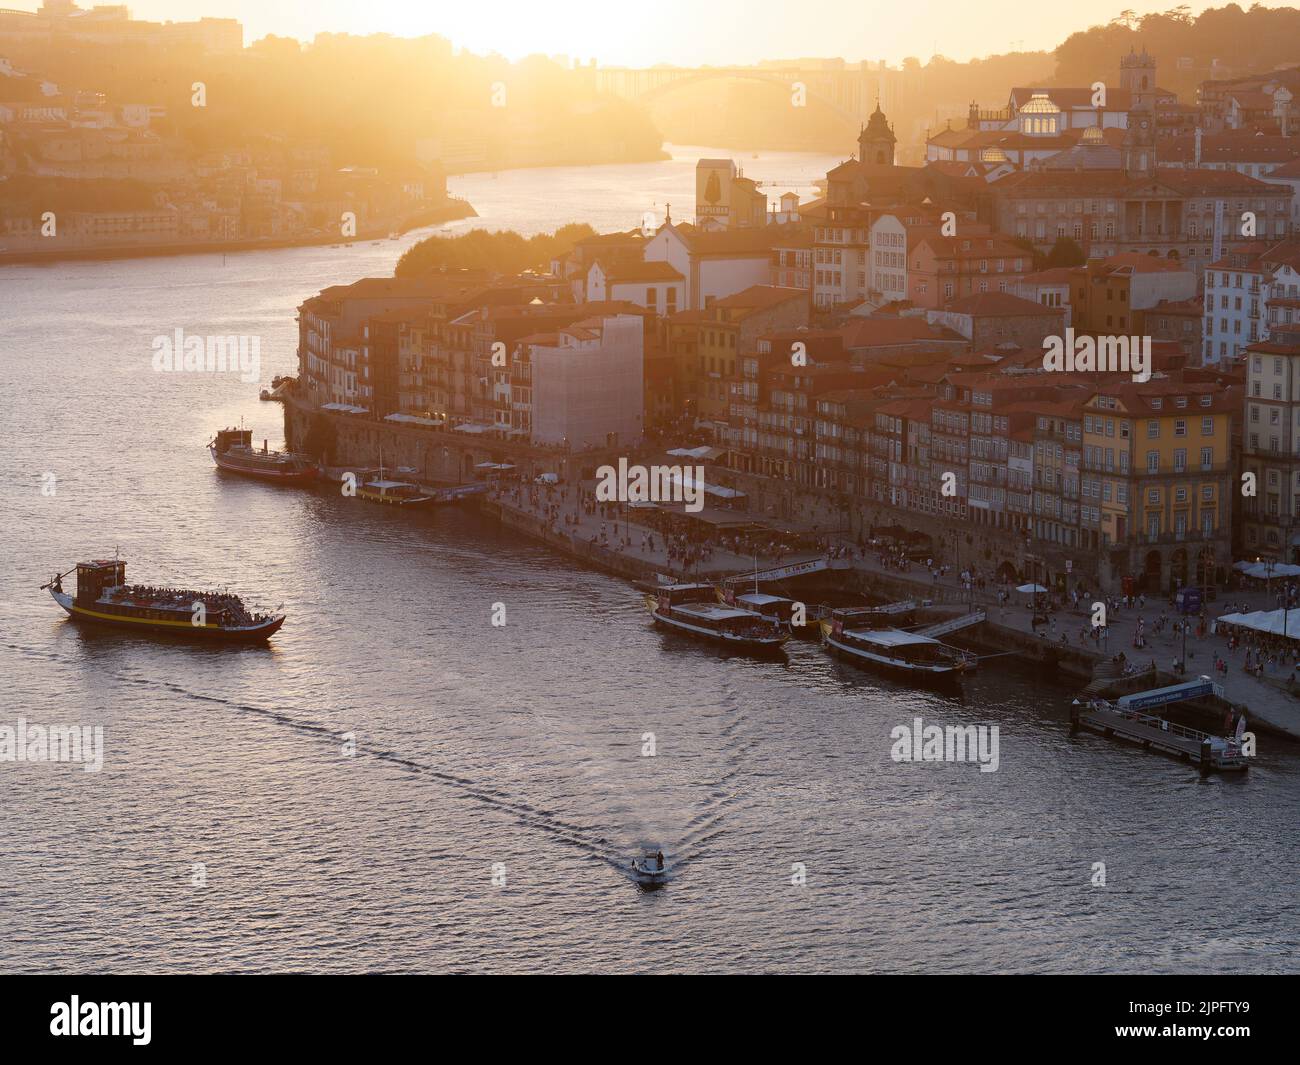 Elevated view of the Ribeira riverfront district and the Douro river in Porto, Portugal. Boat with passengers arrives into the harbour. Stock Photo